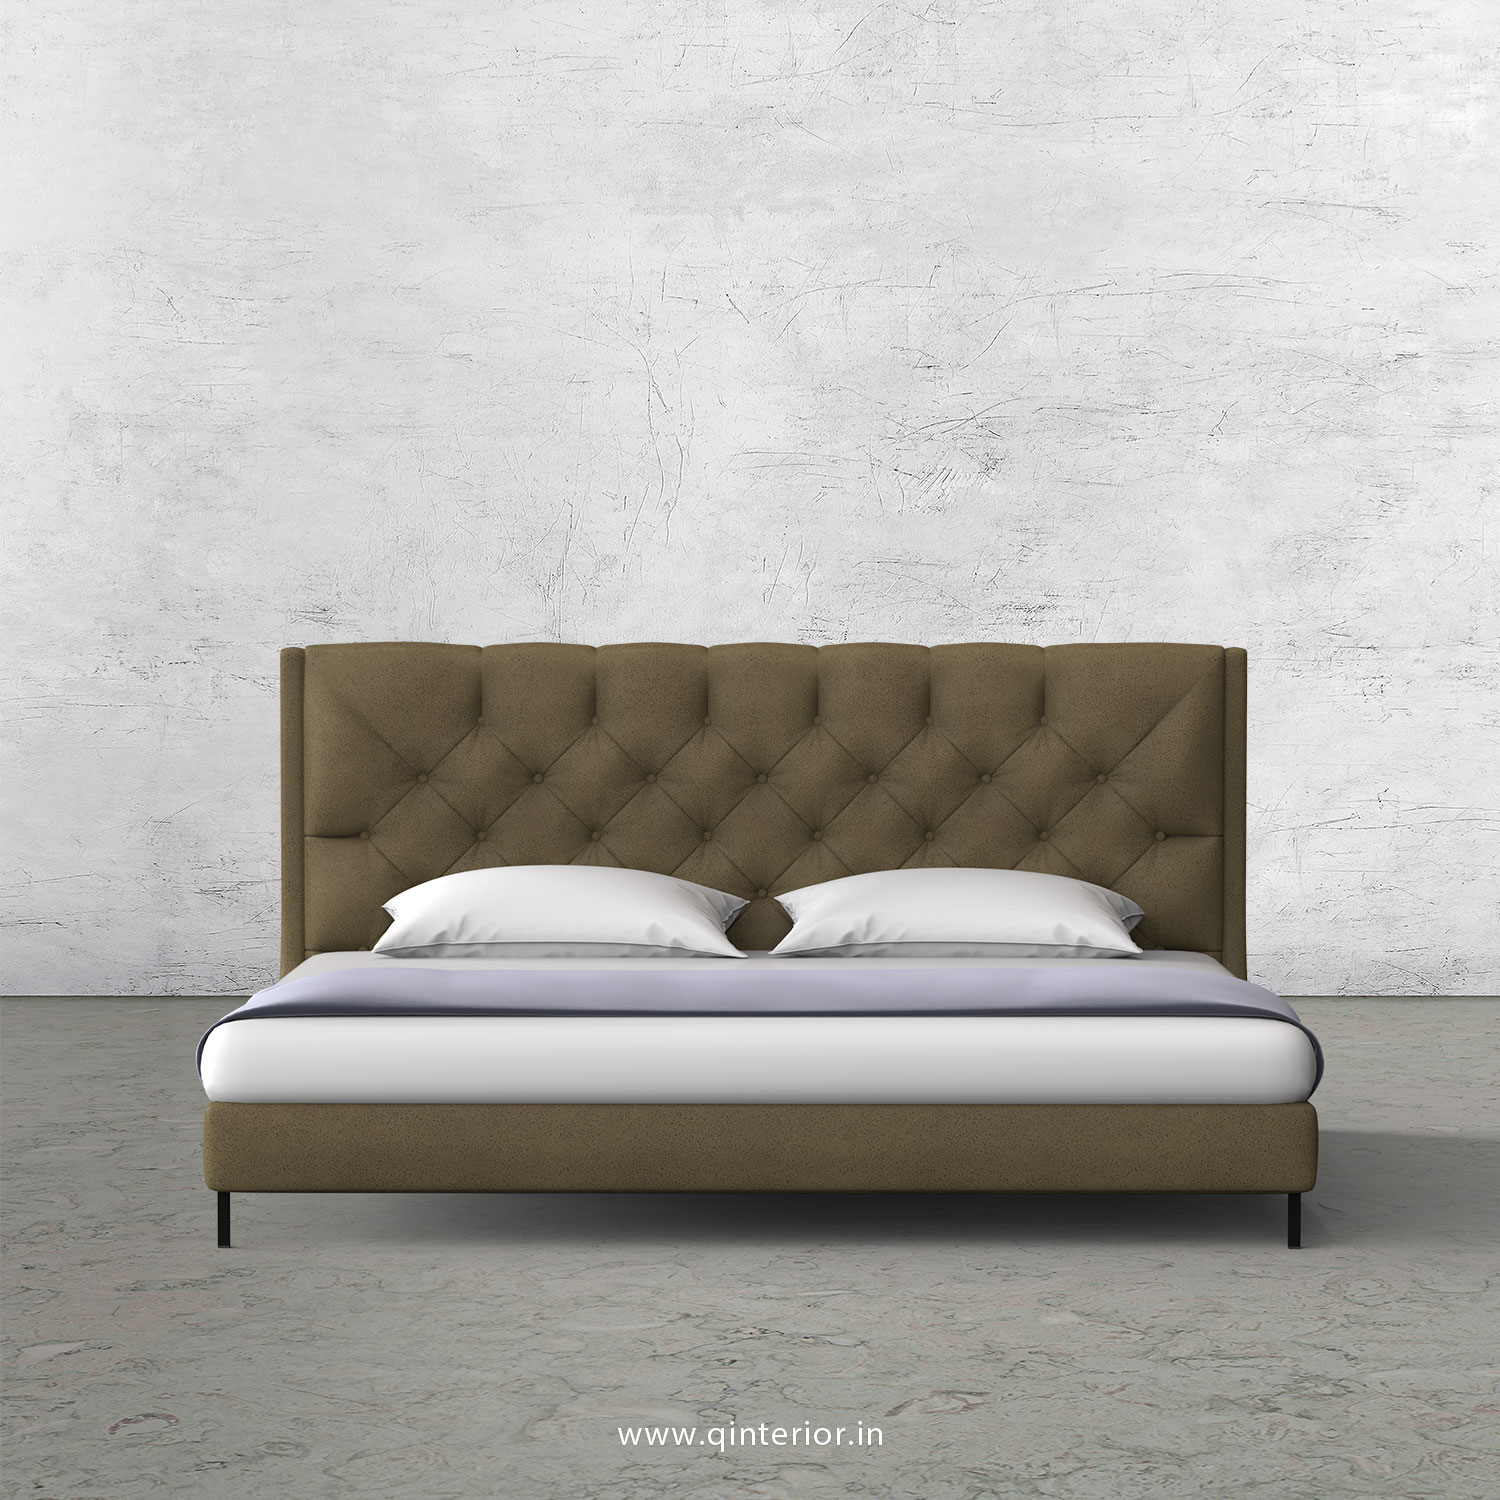 Scorpius King Size Bed in Fab Leather Fabric - KBD003 FL01